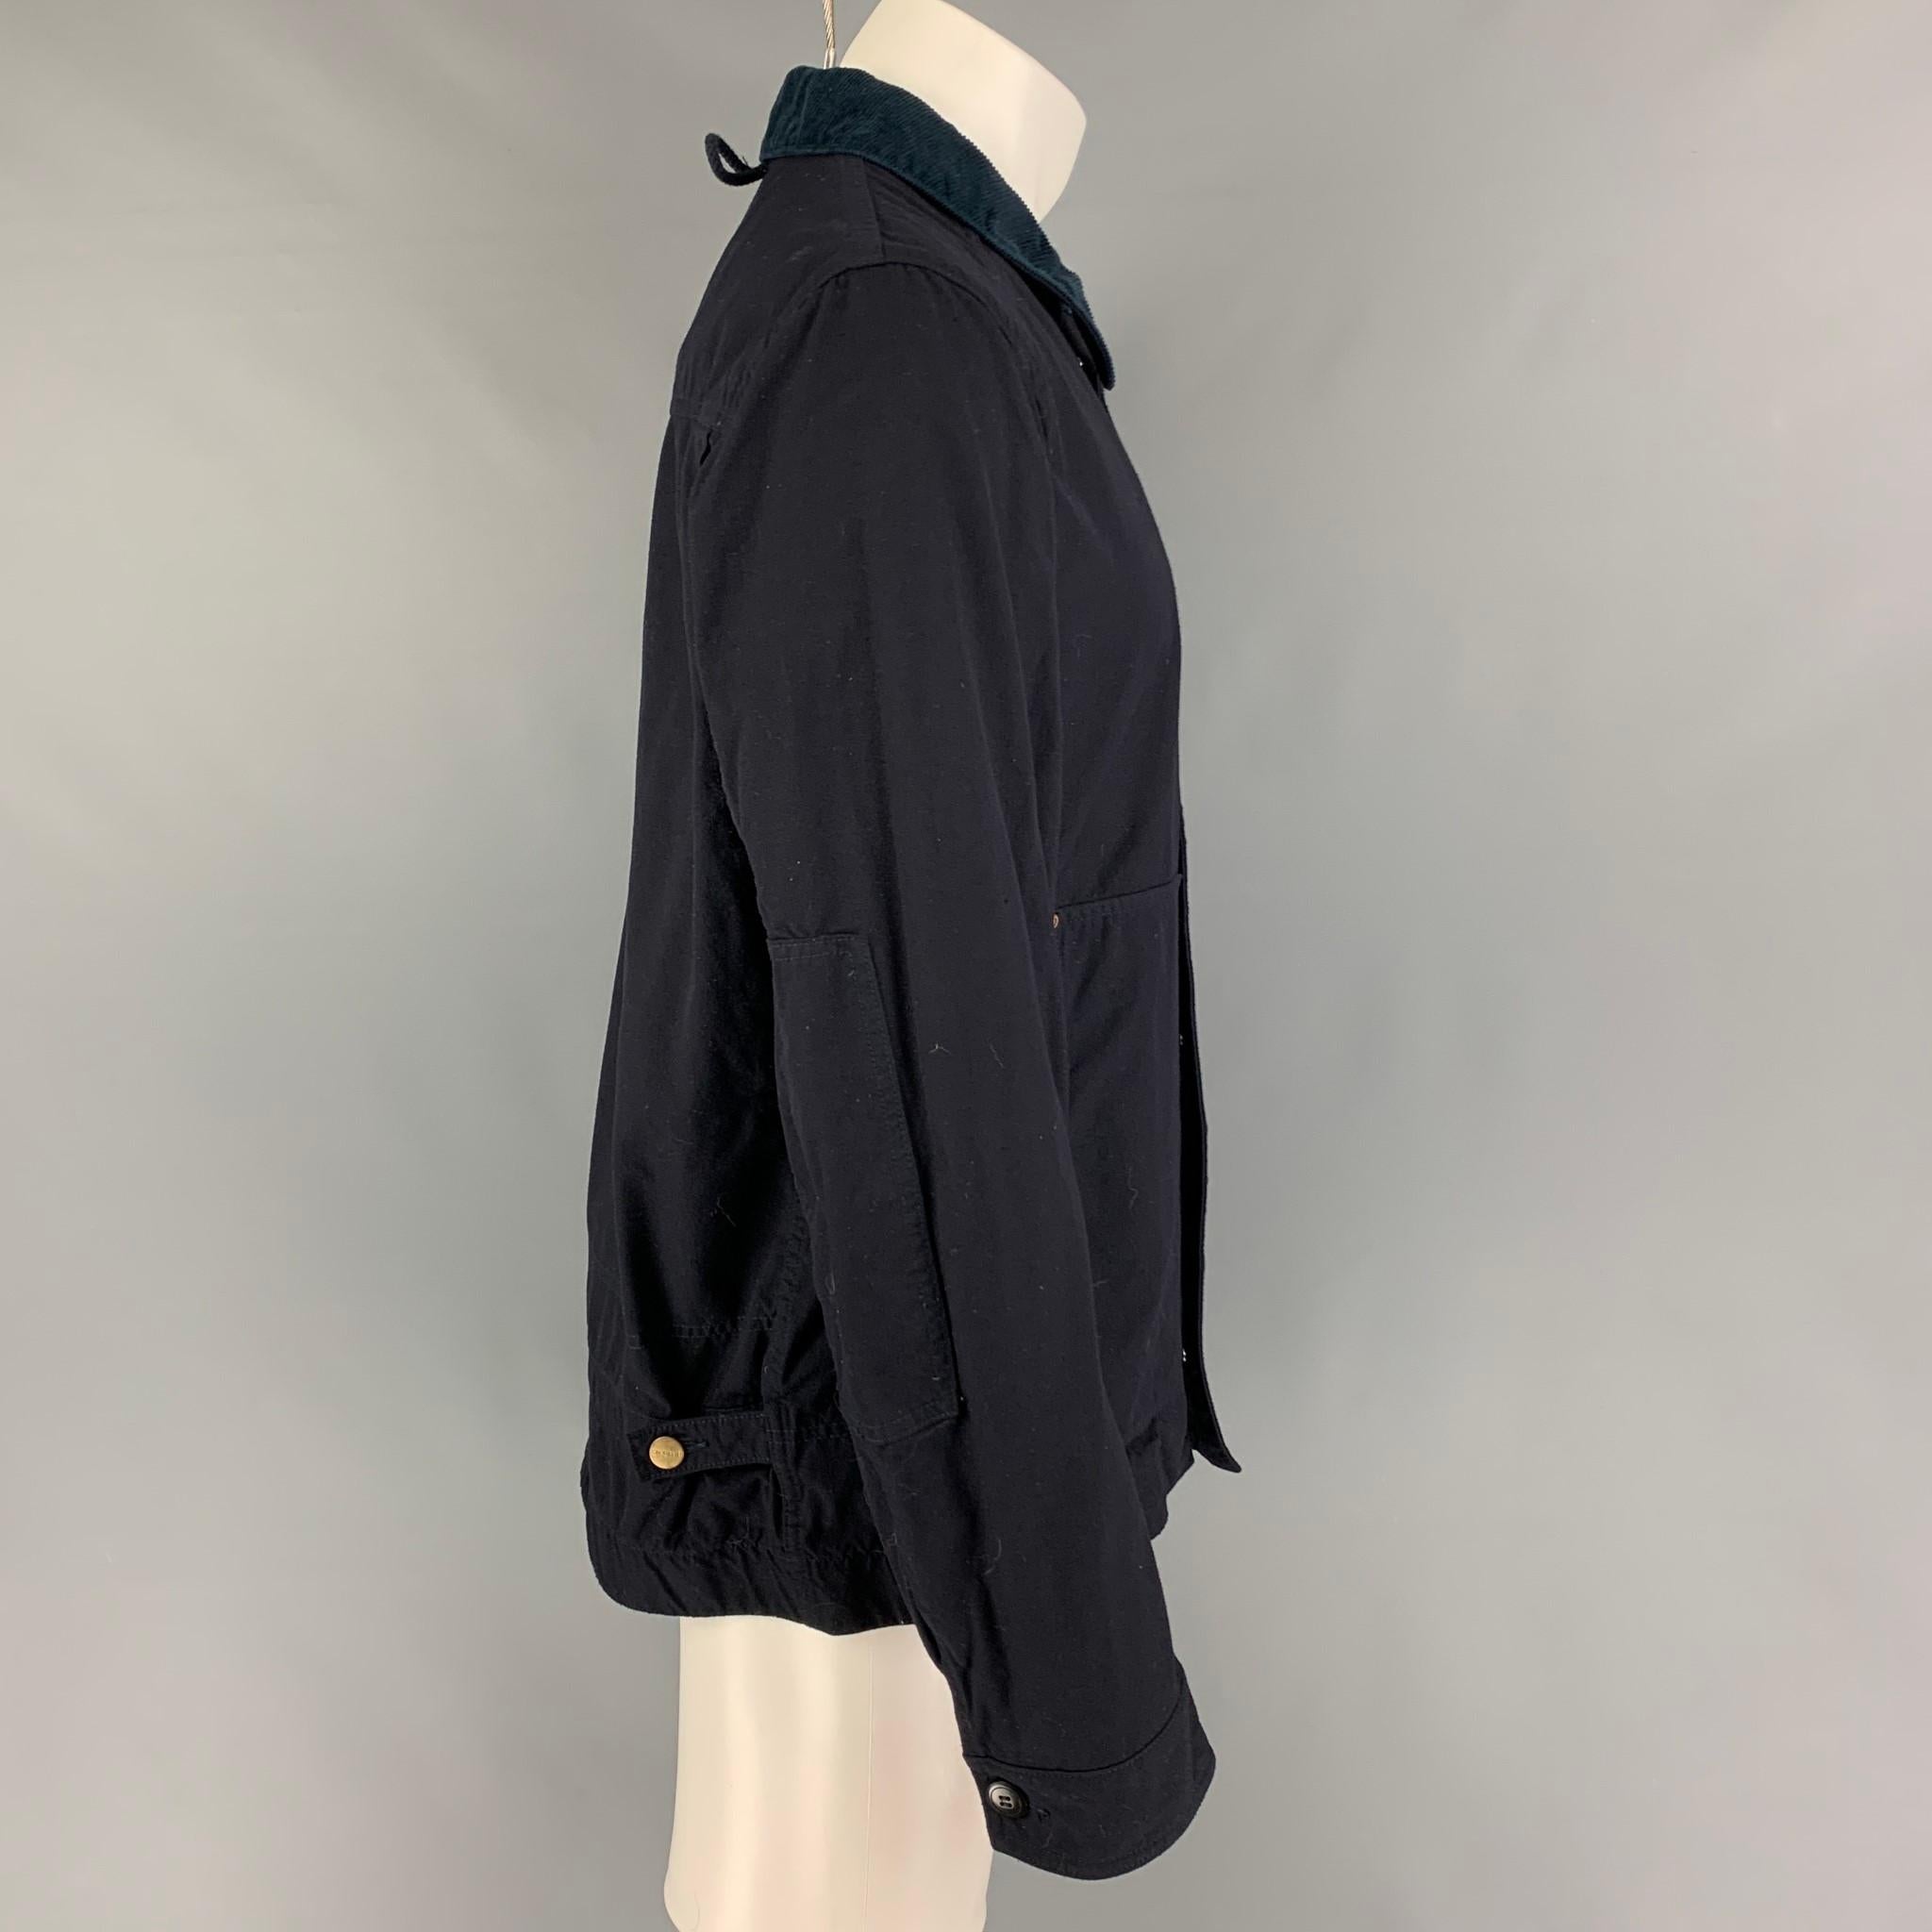 JUNYA WATANABE x CARHARTT jacket comes in a navy cotton featuring a worker style, corduroy collar, patch pockets, side tabs, and a zip & snap button closure. Made in Japan. 

Very Good Pre-Owned Condition.
Marked: L

Measurements:

Shoulder: 18